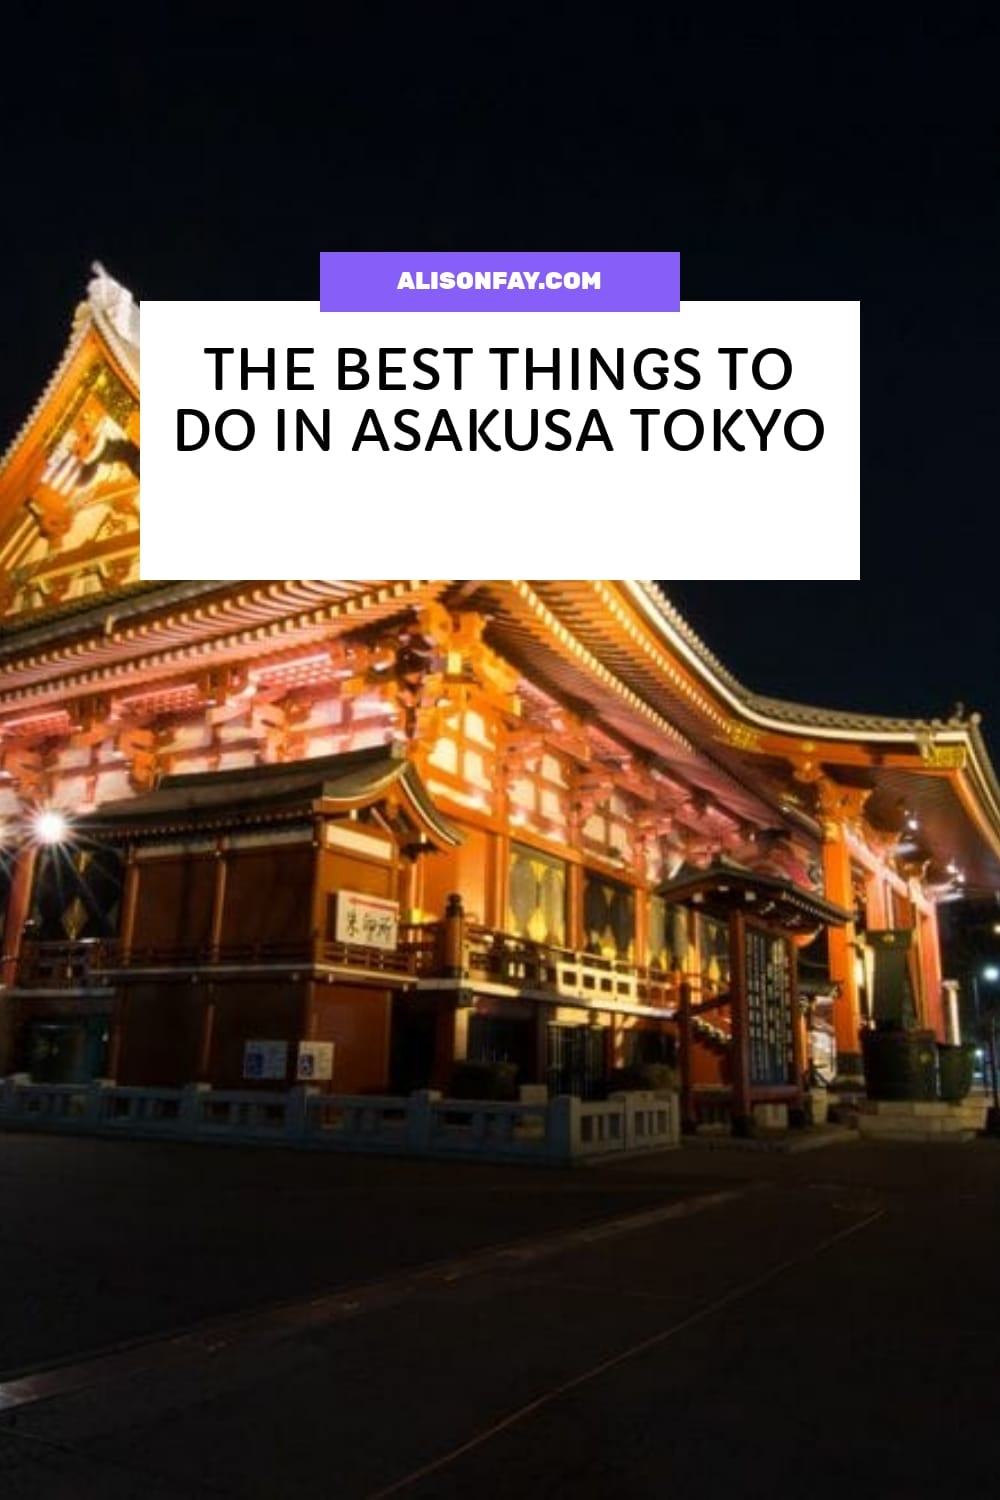 The Best Things To Do in Asakusa Tokyo